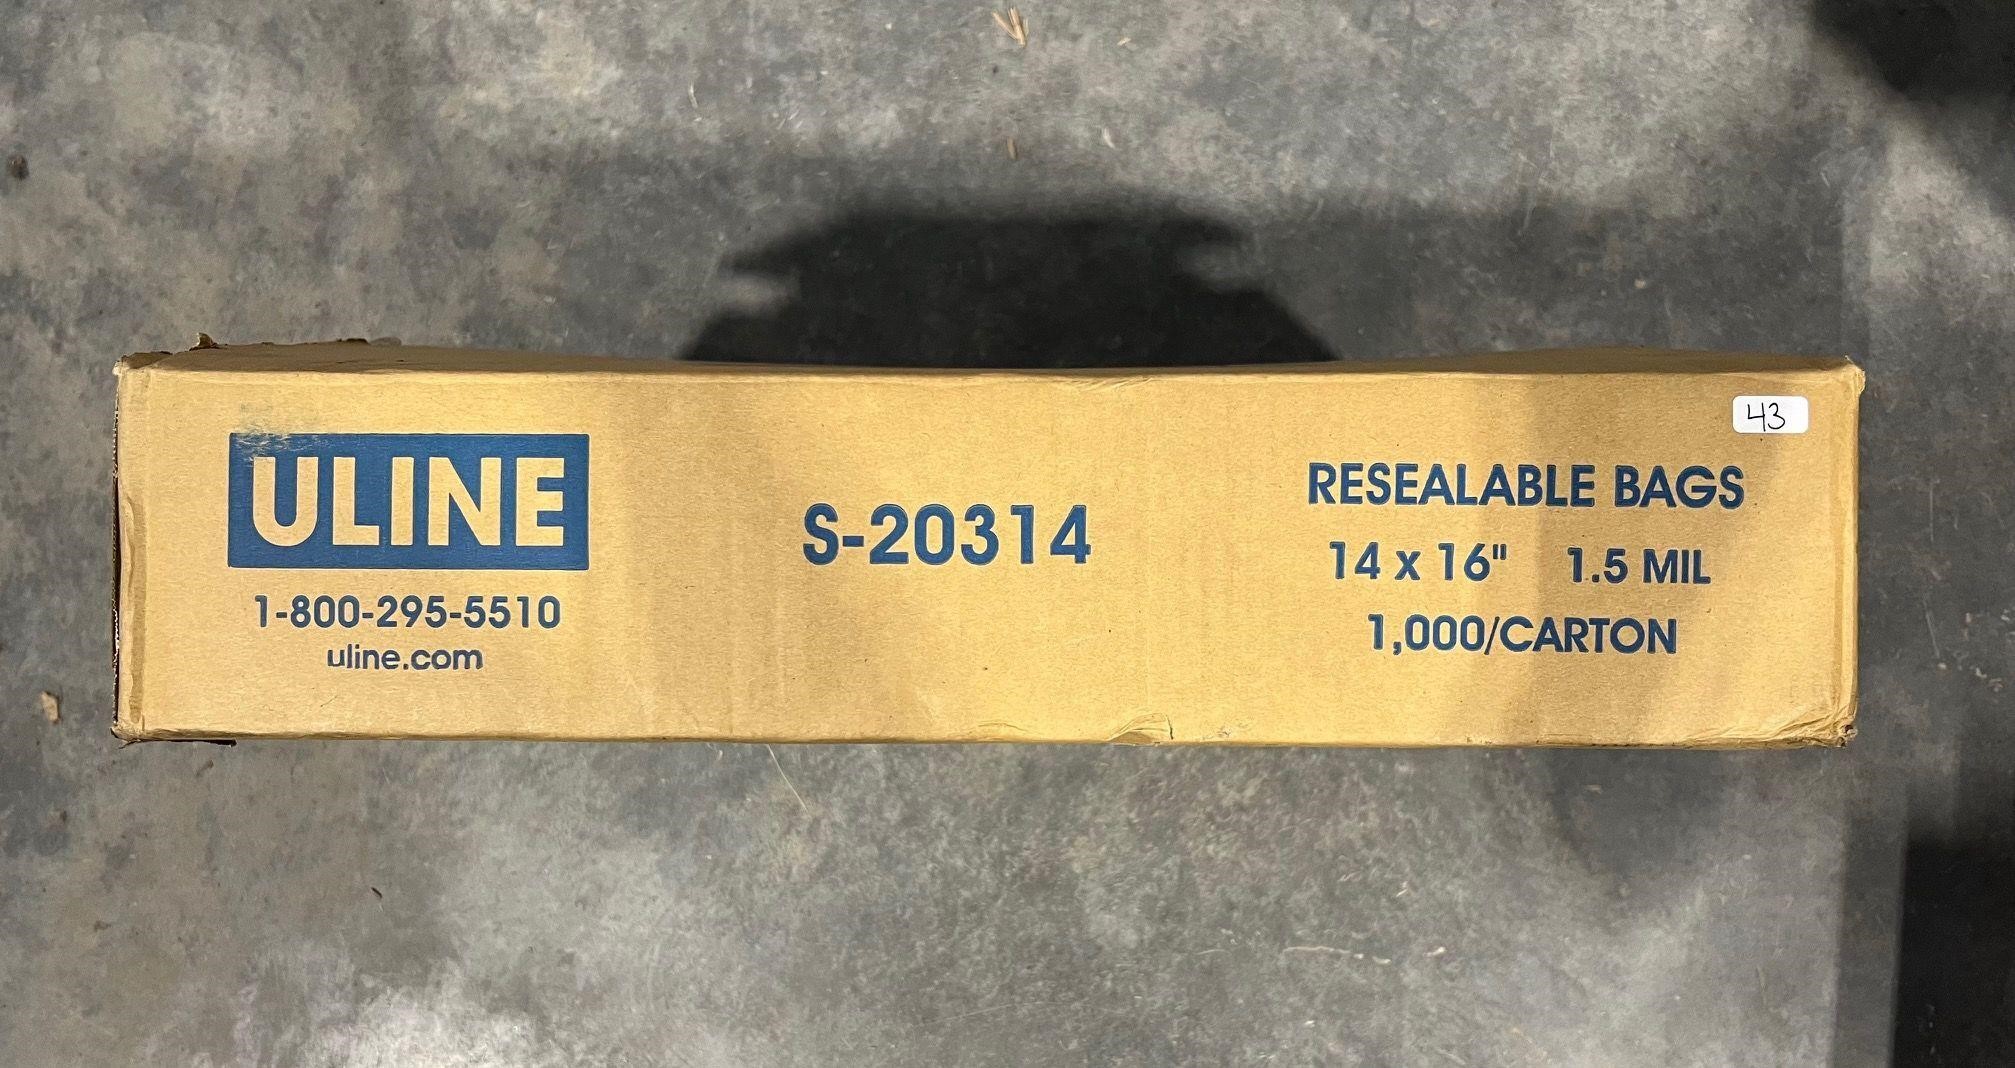 ULINE RESEALABLE BAGS  - OPENED BOX